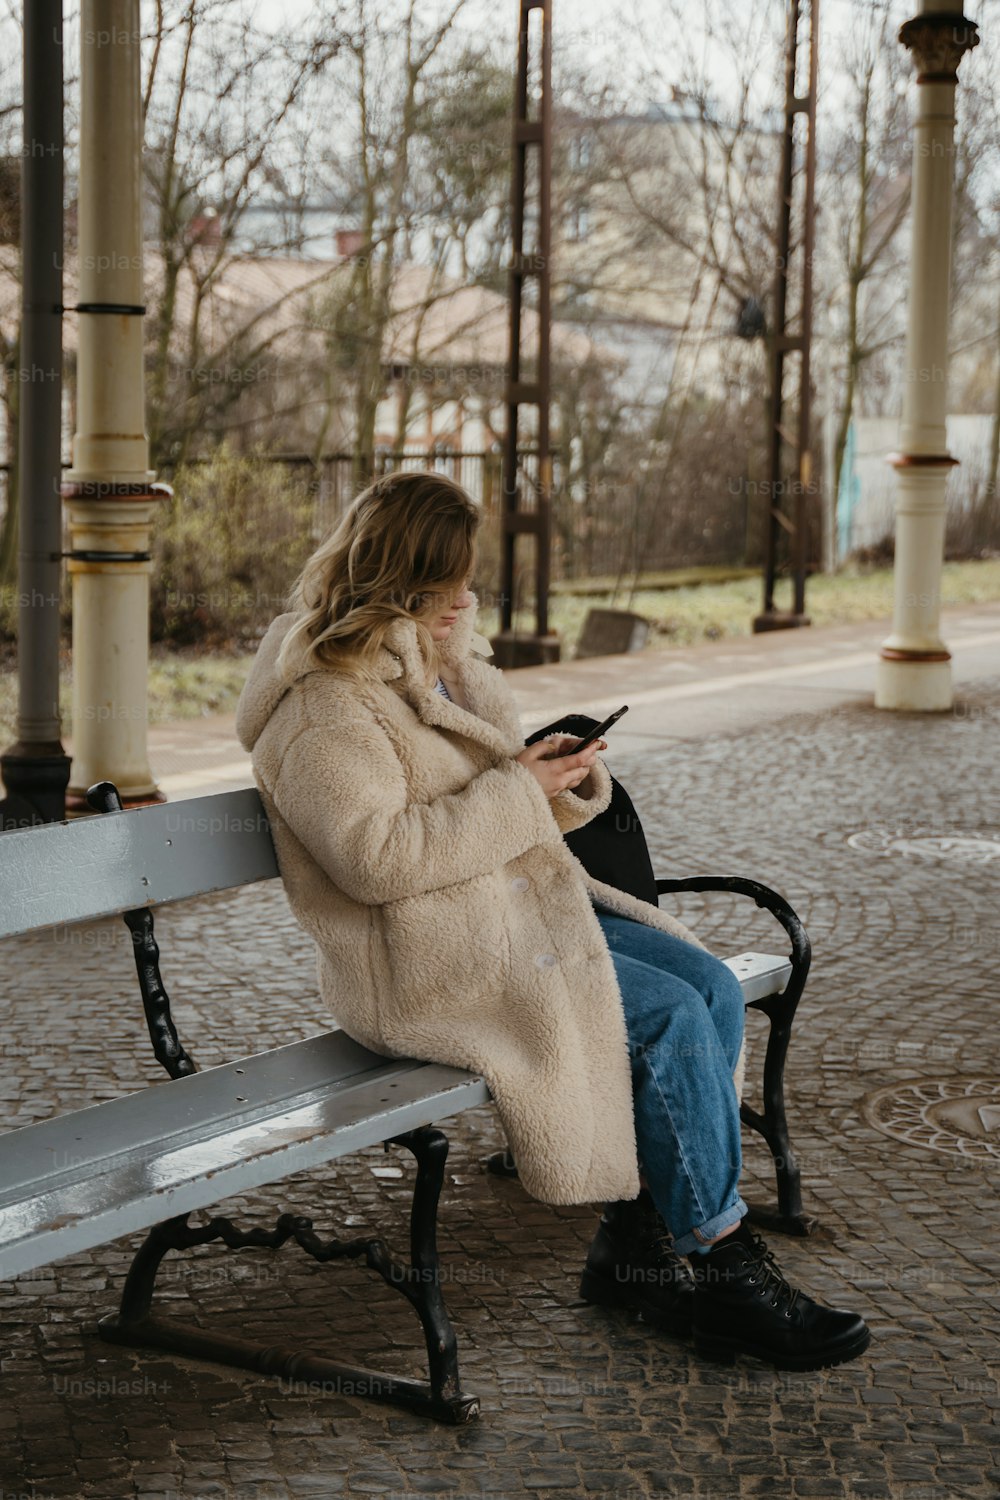 a woman sitting on a bench using a cell phone